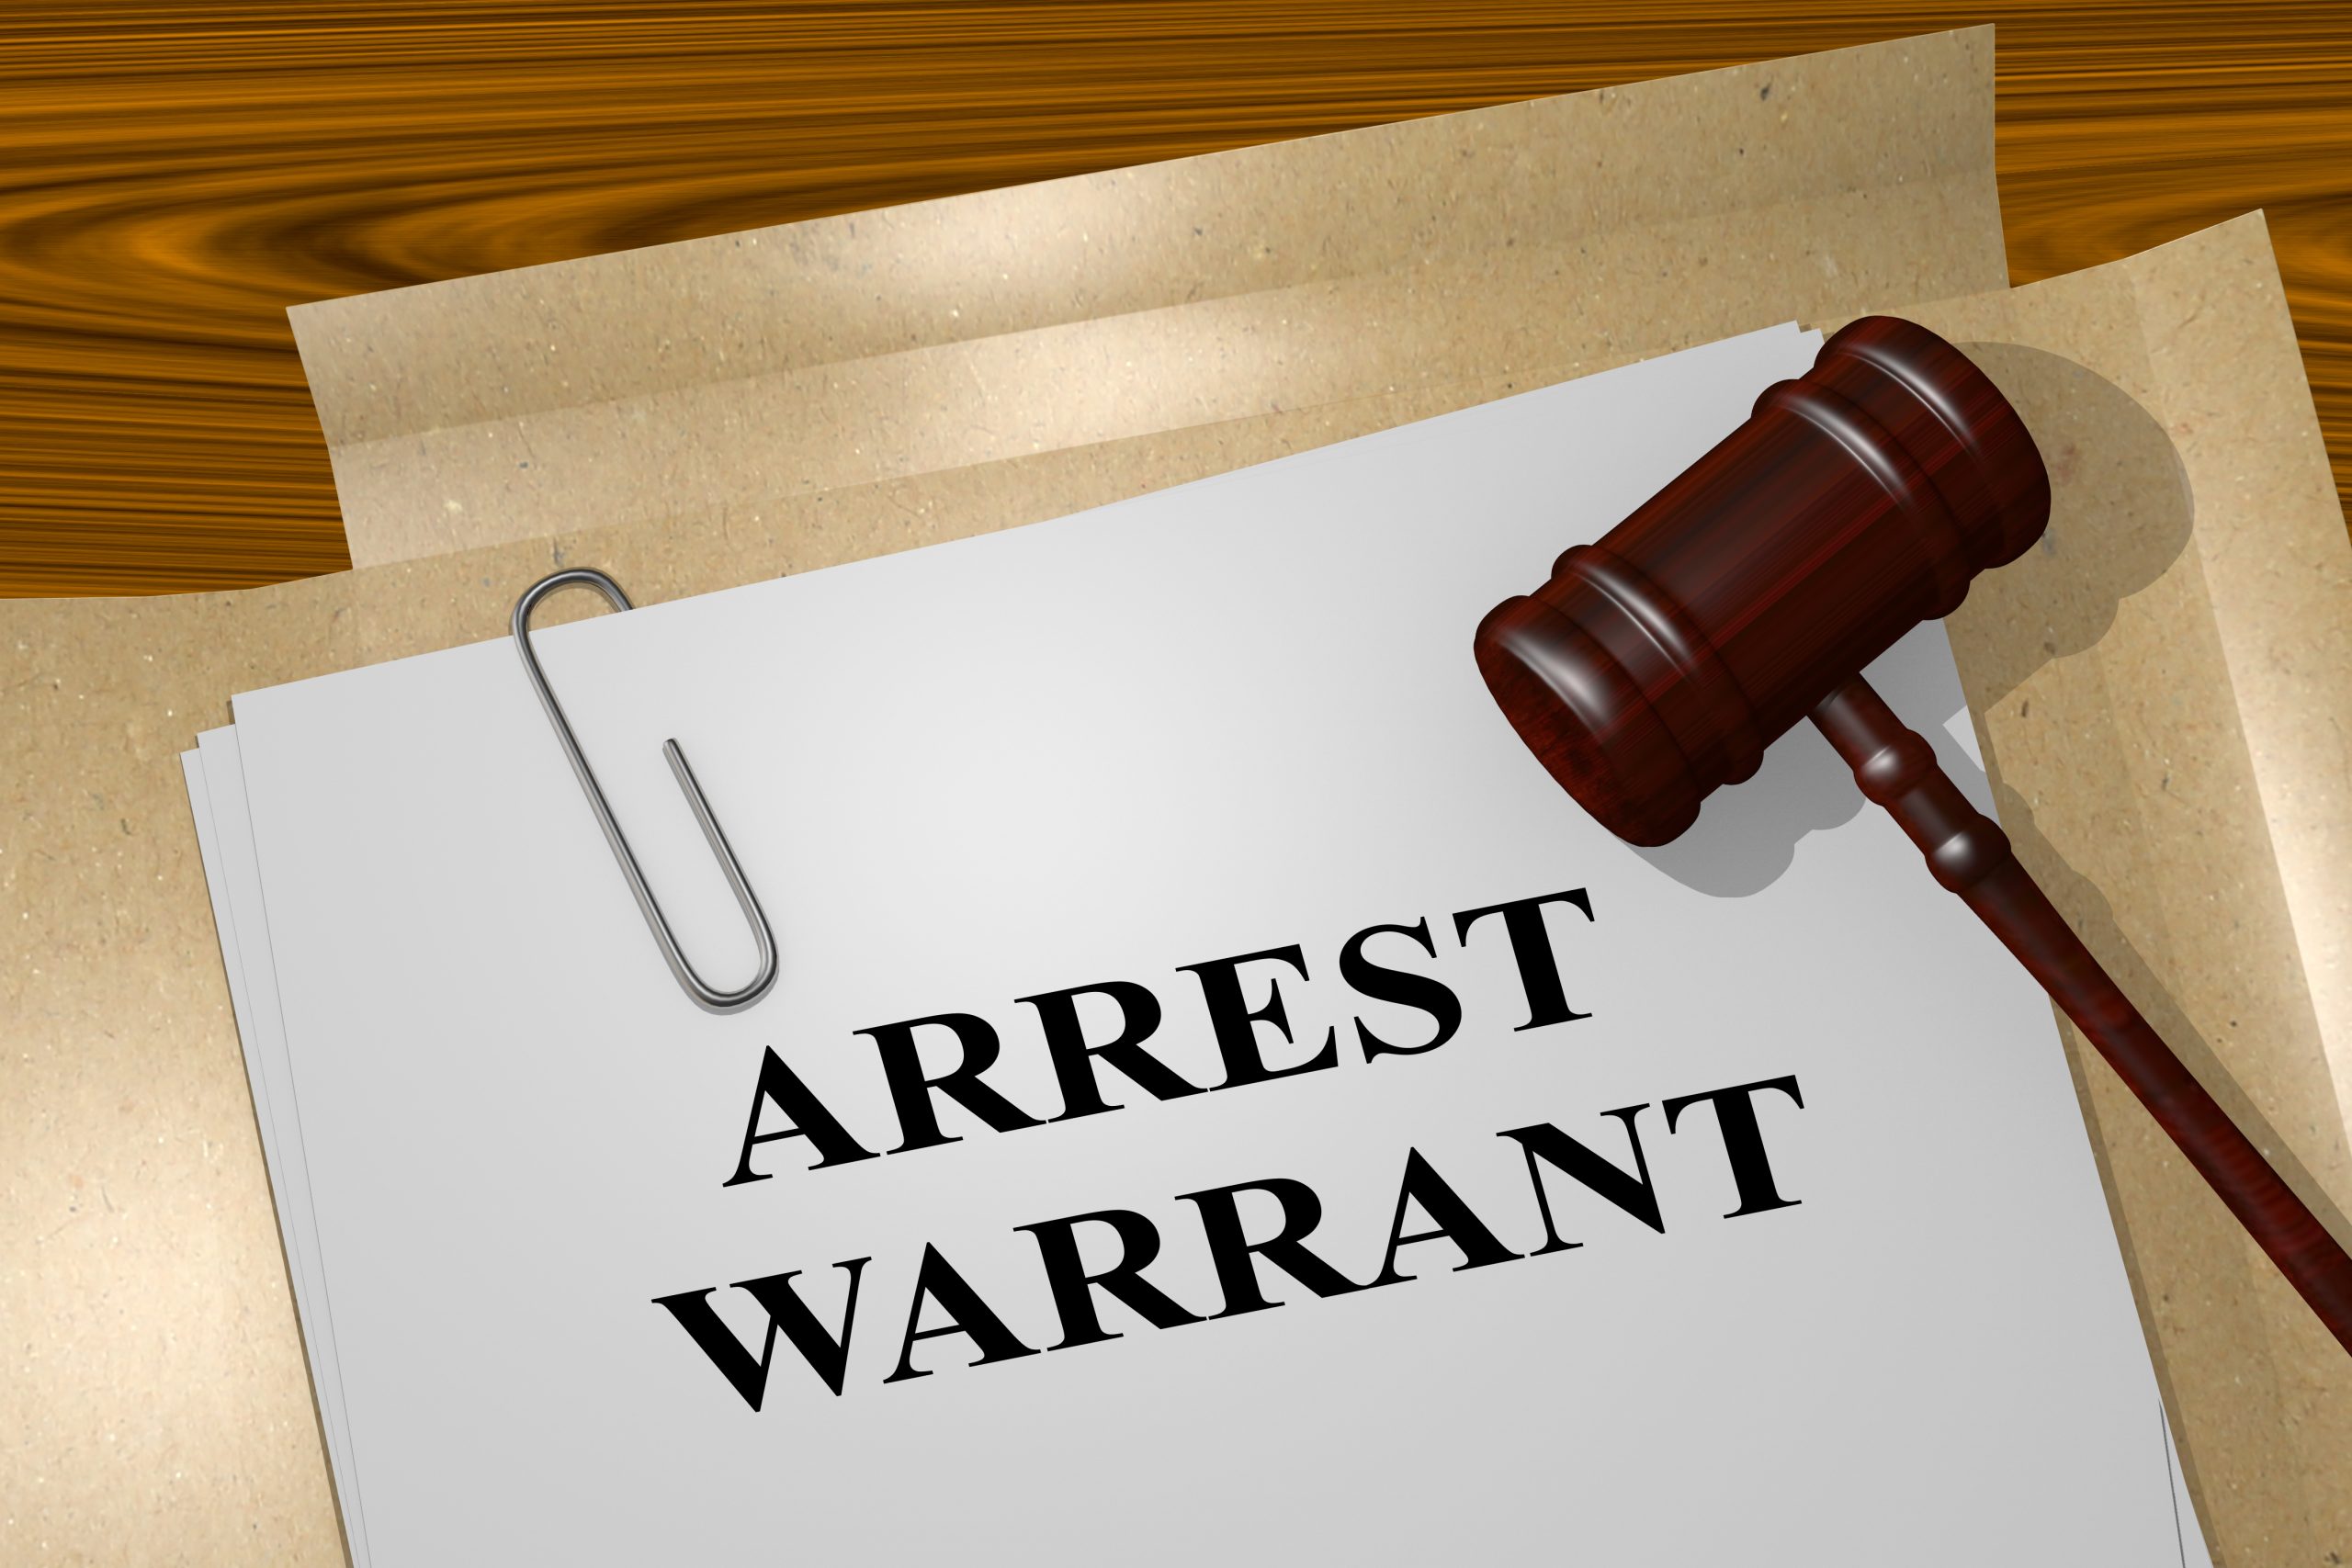 An outstanding warrant for your arrest can cause worry and anxiety. If